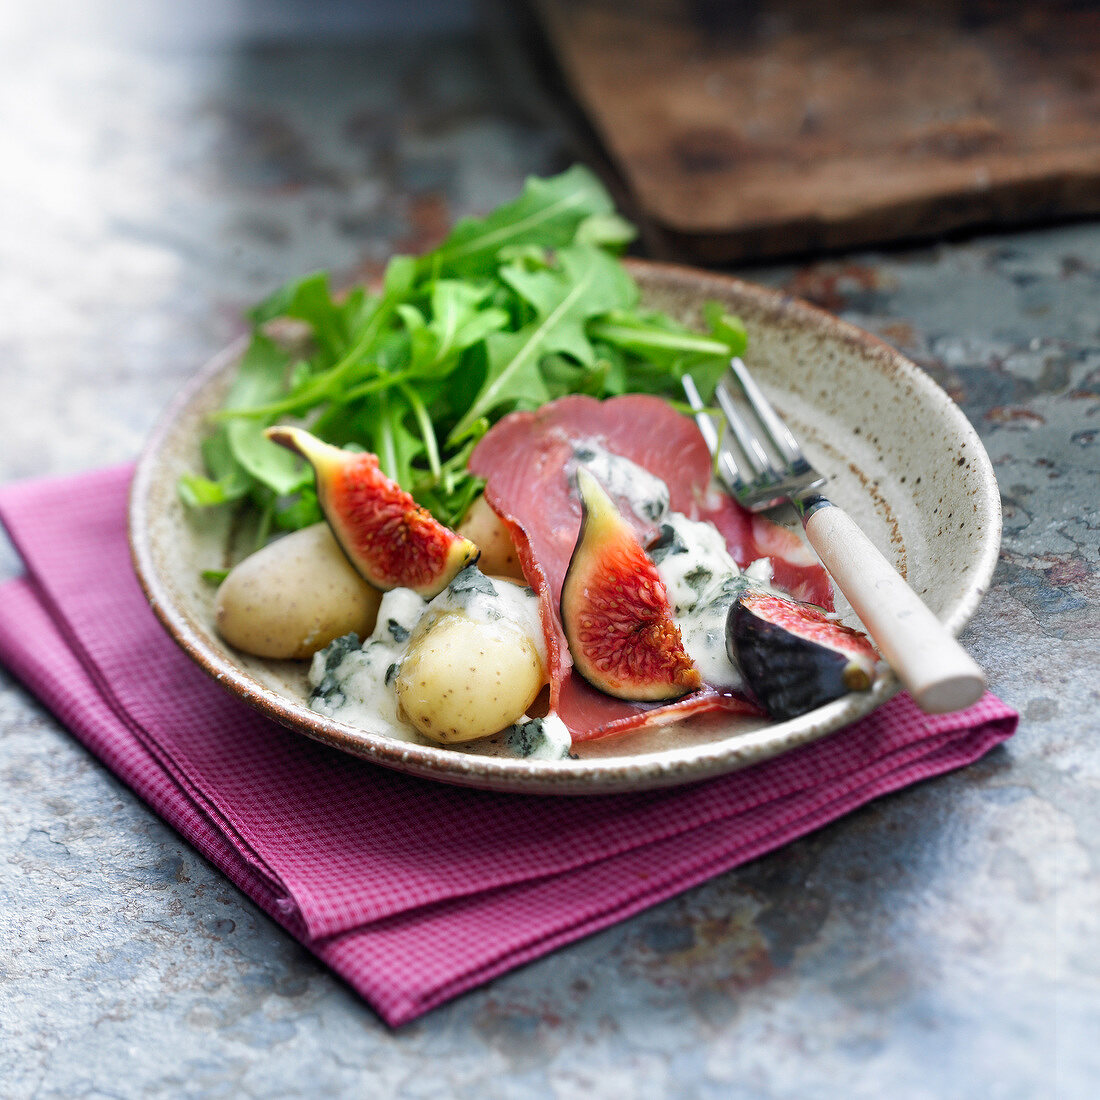 Gorgonzola Raclette with coppa,figs and potatoes